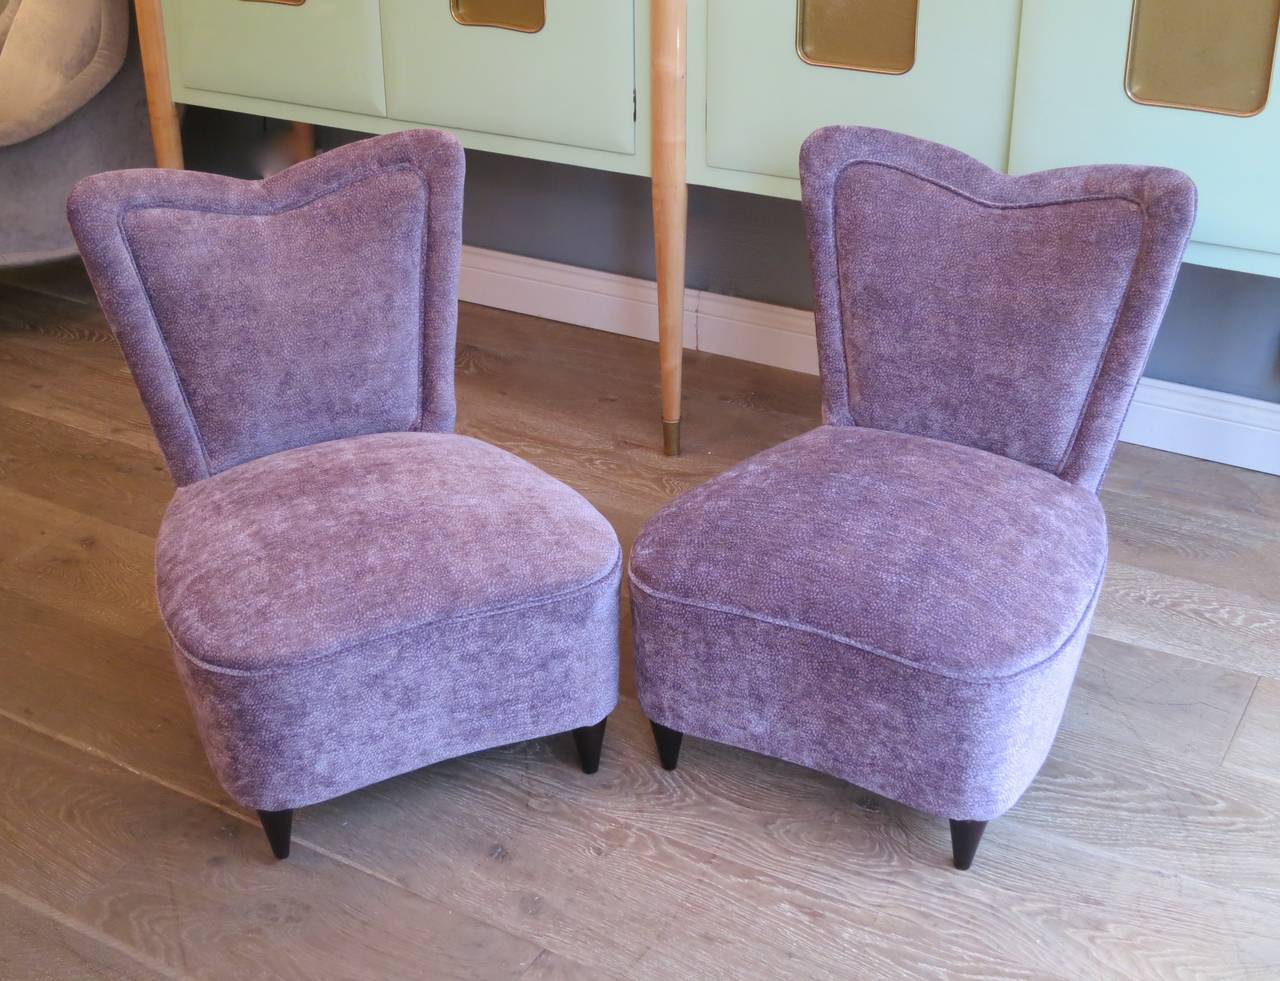 A pair of heart shaped slipper/bedroom chairs re upholstered  in purple textured Osbourne & Little fabric.